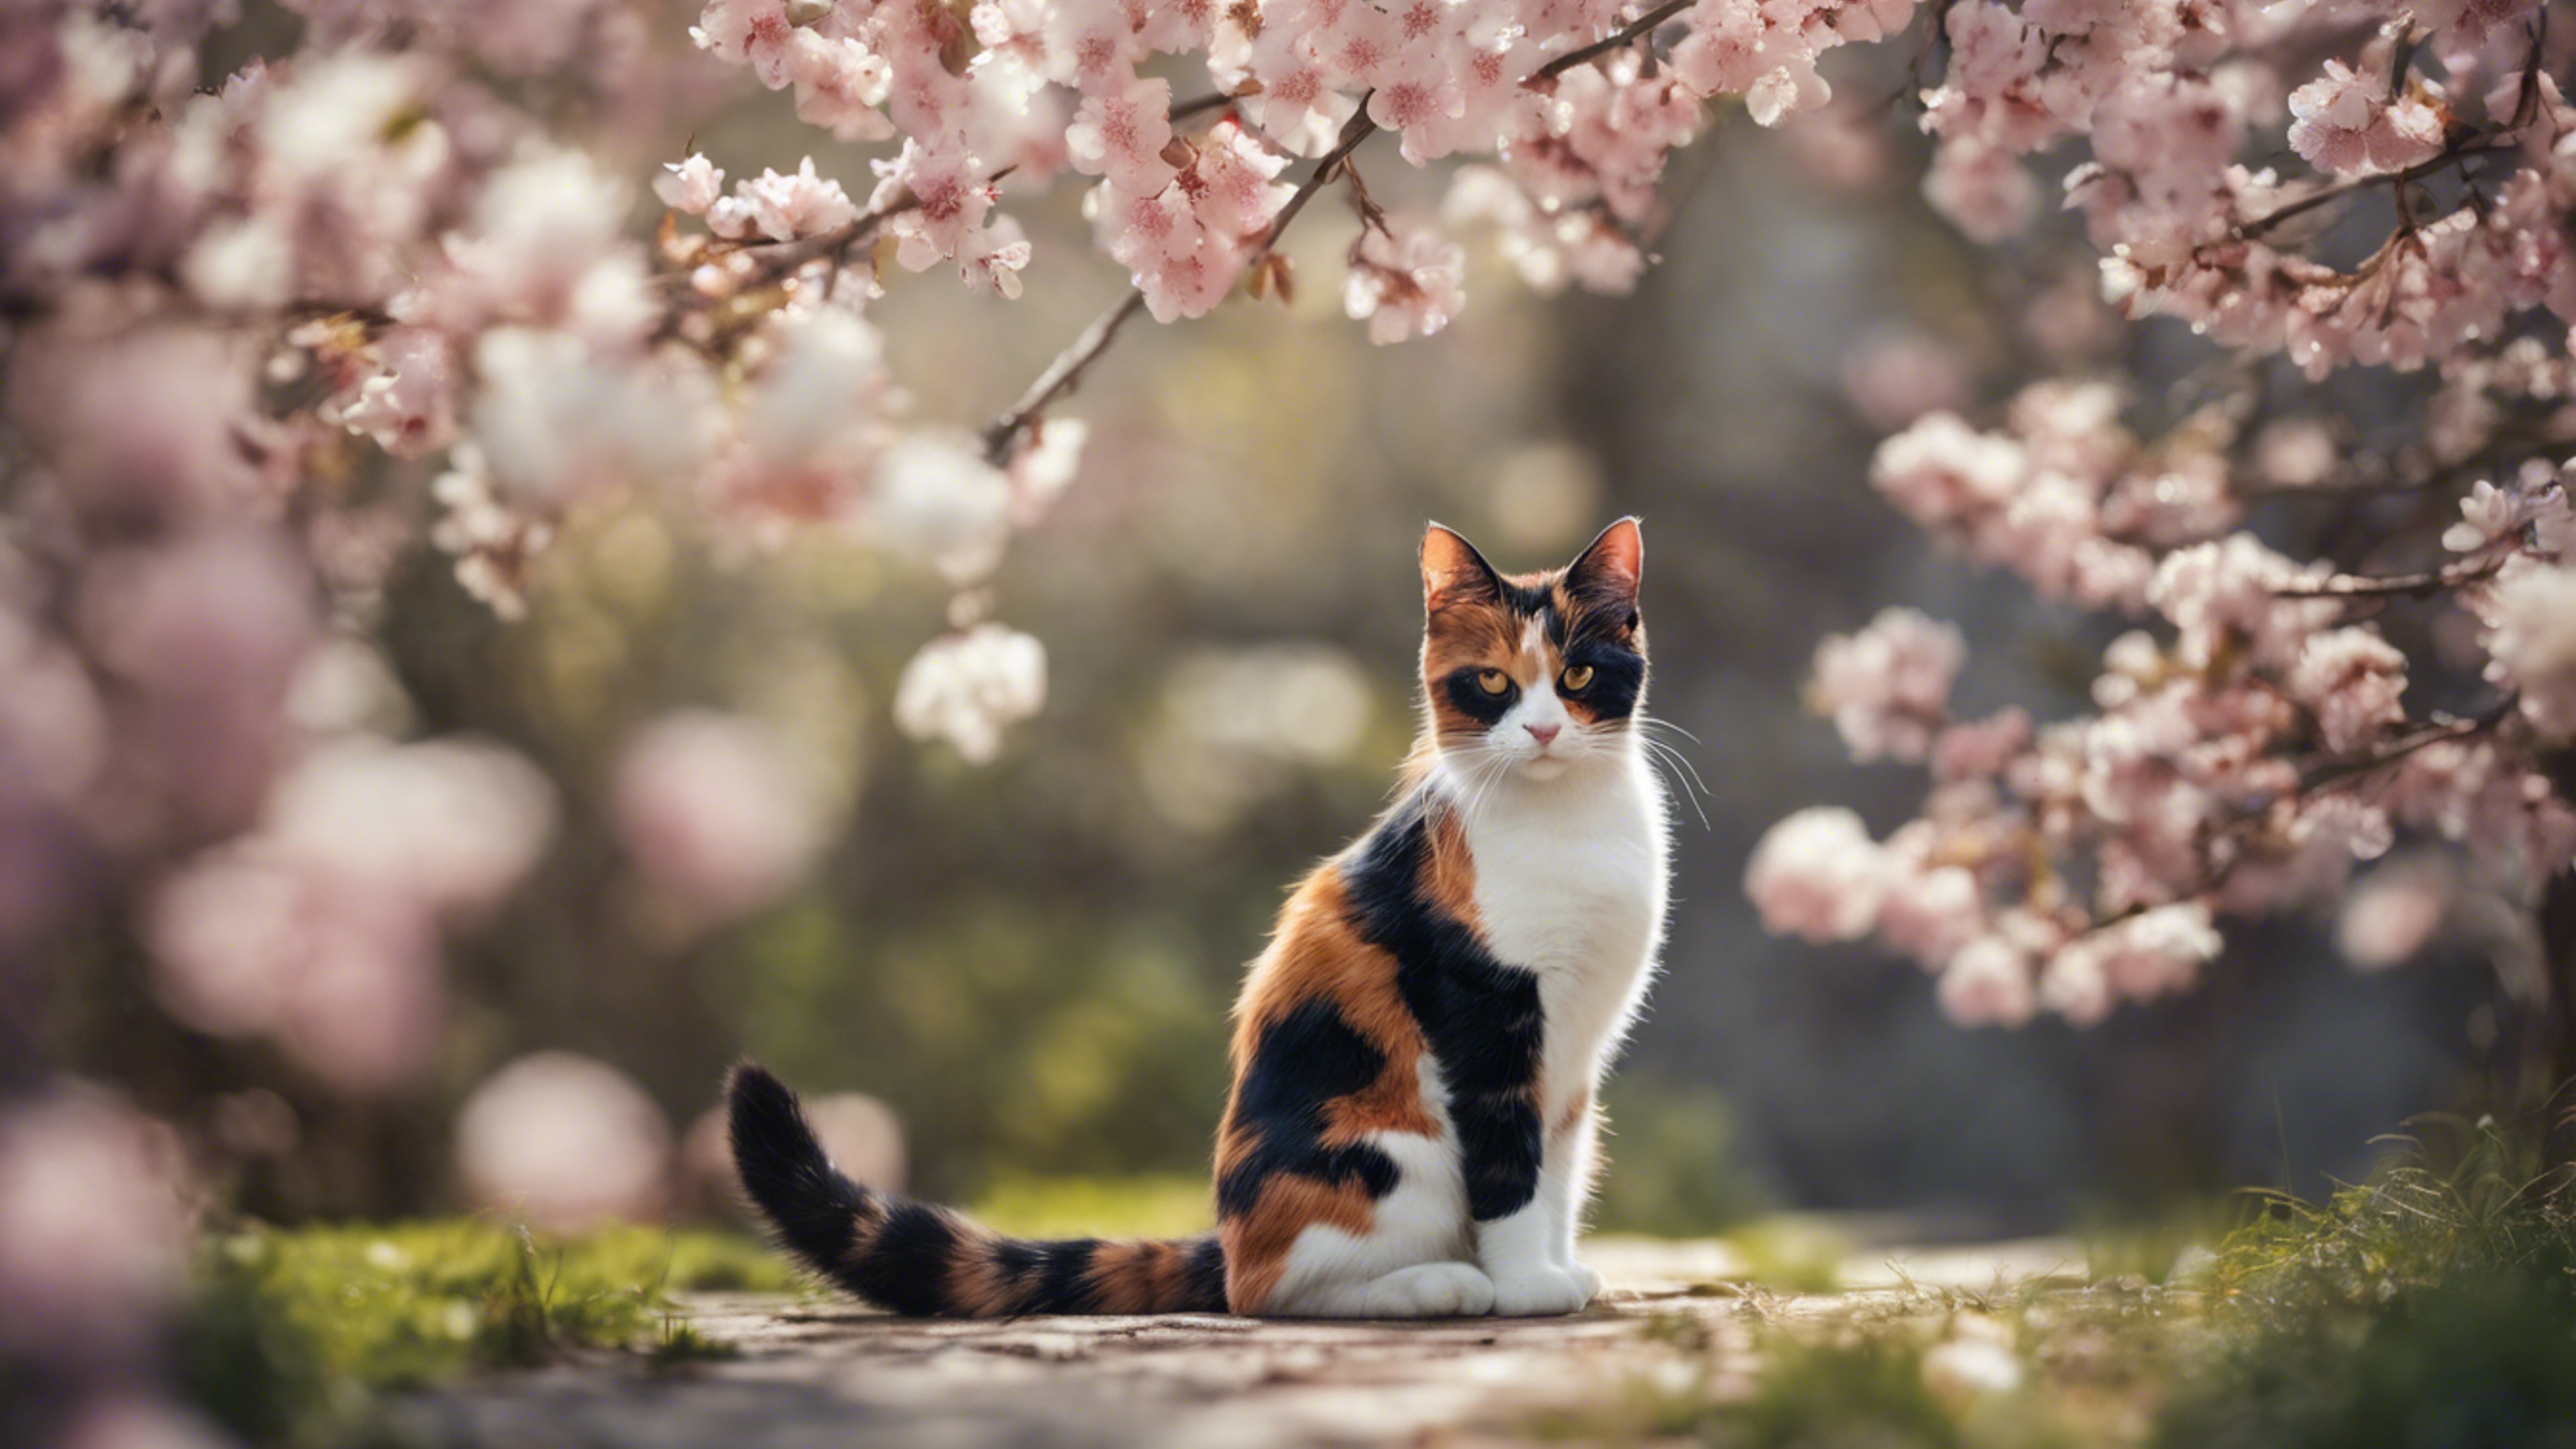 A scene of a secret conversation between spring blossoms and a curious calico cat. 墙纸[25a93ed29c5f43b5b851]